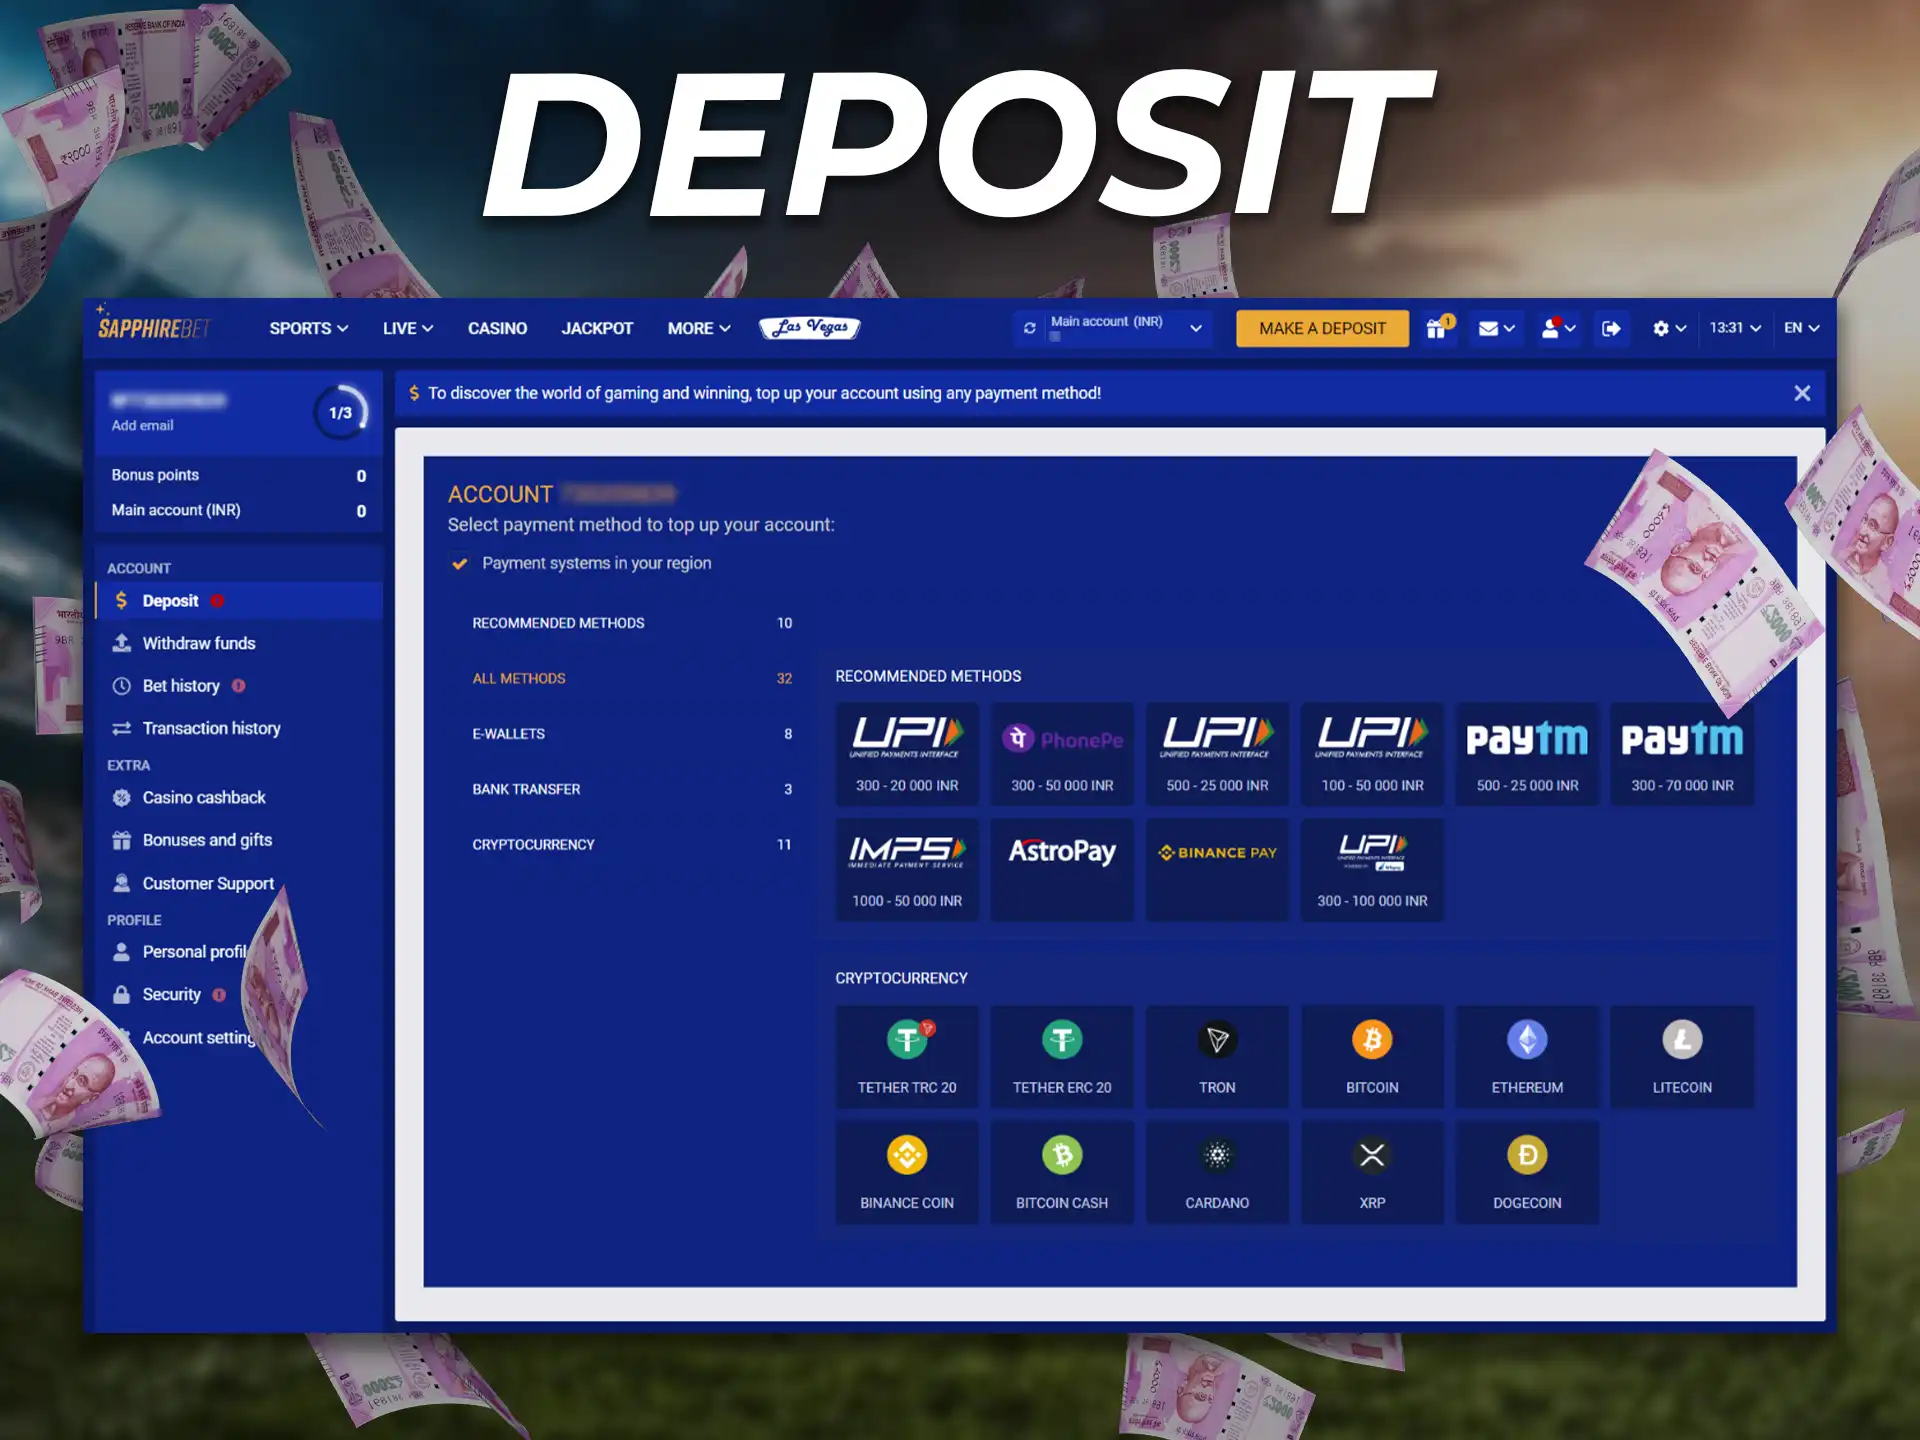 Step-by-step instructions on how to make a deposit to start betting.